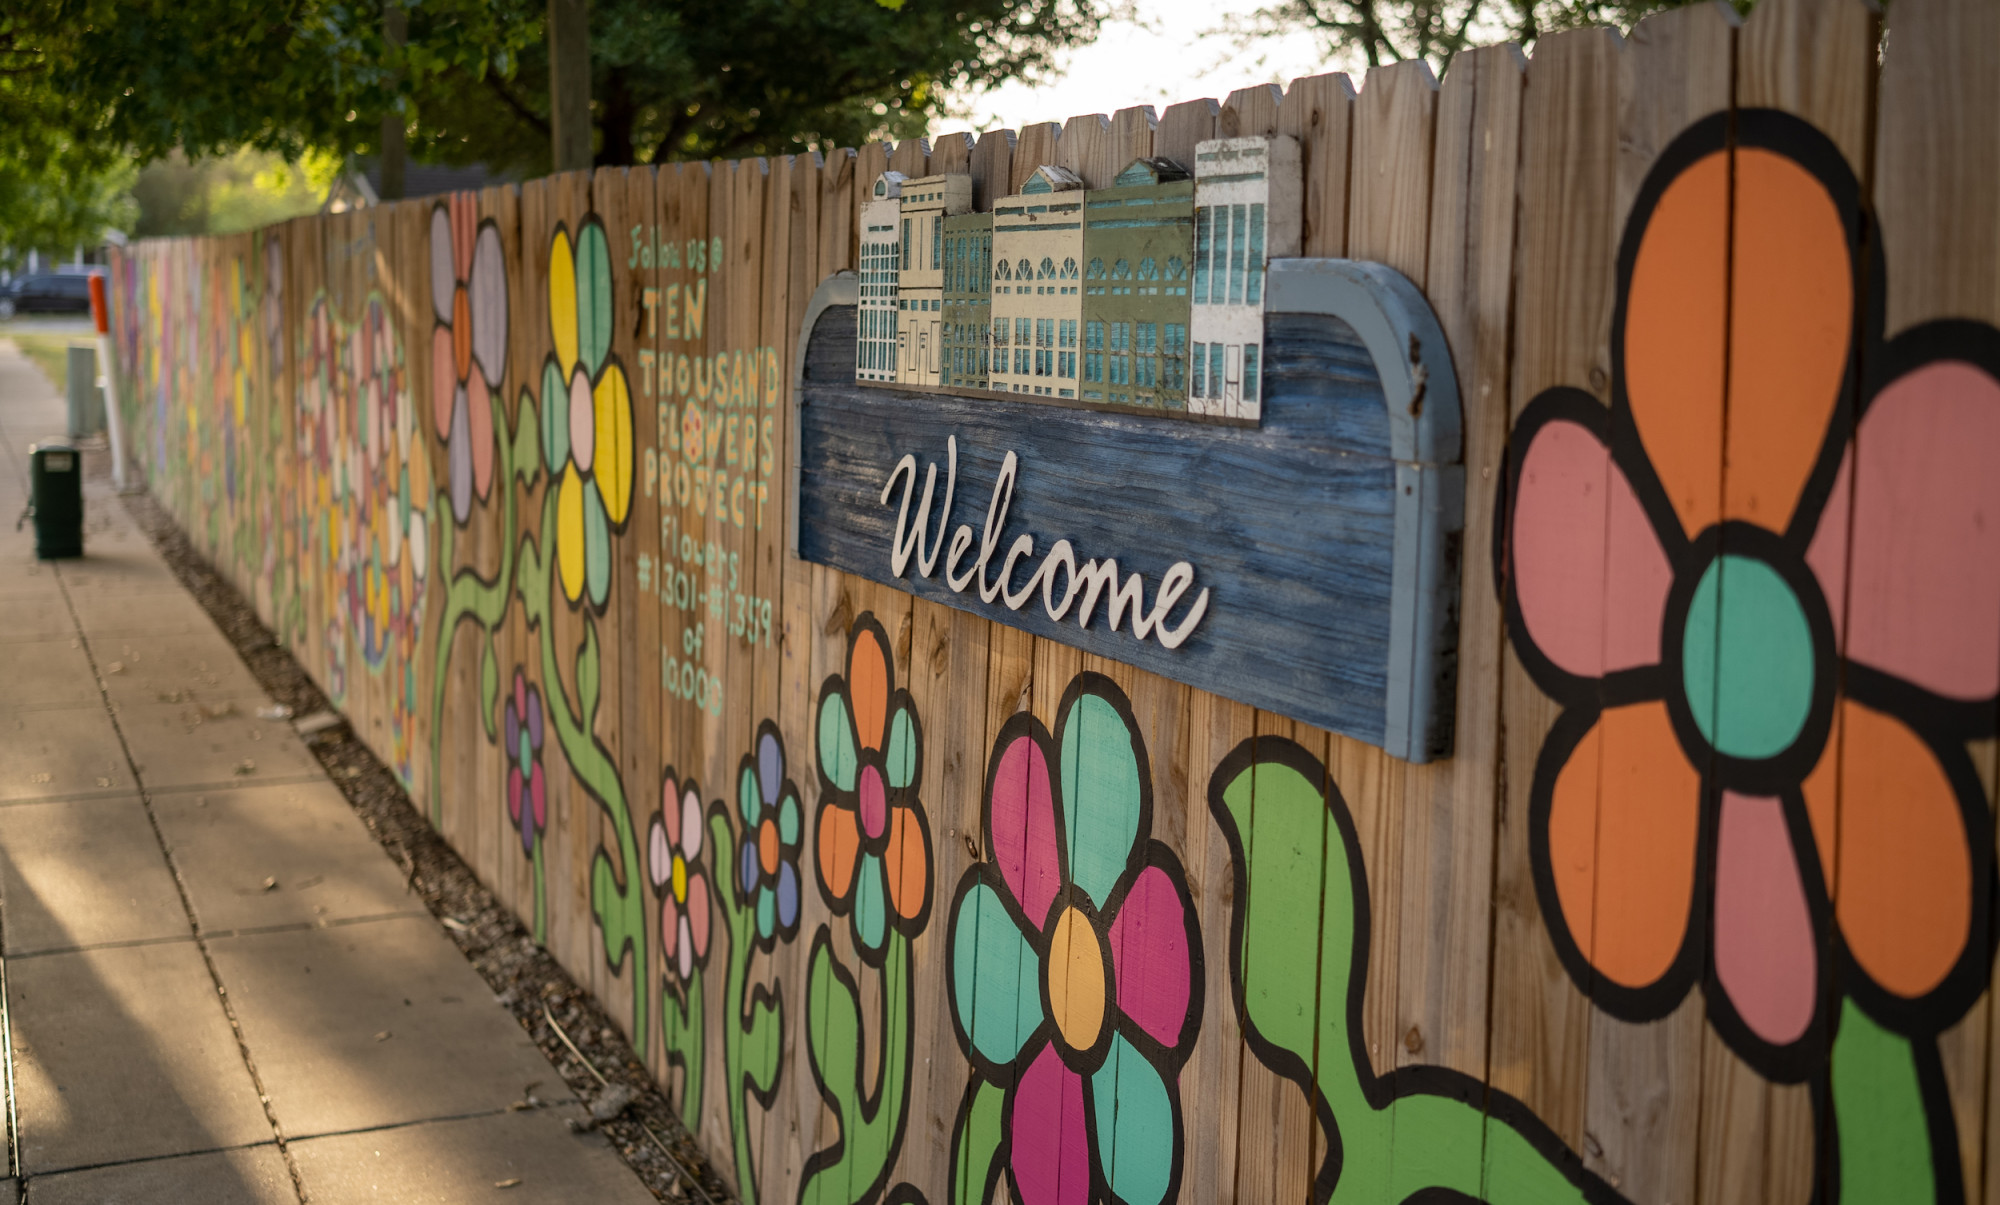 Wooden fence with welcome sign and painted flowers